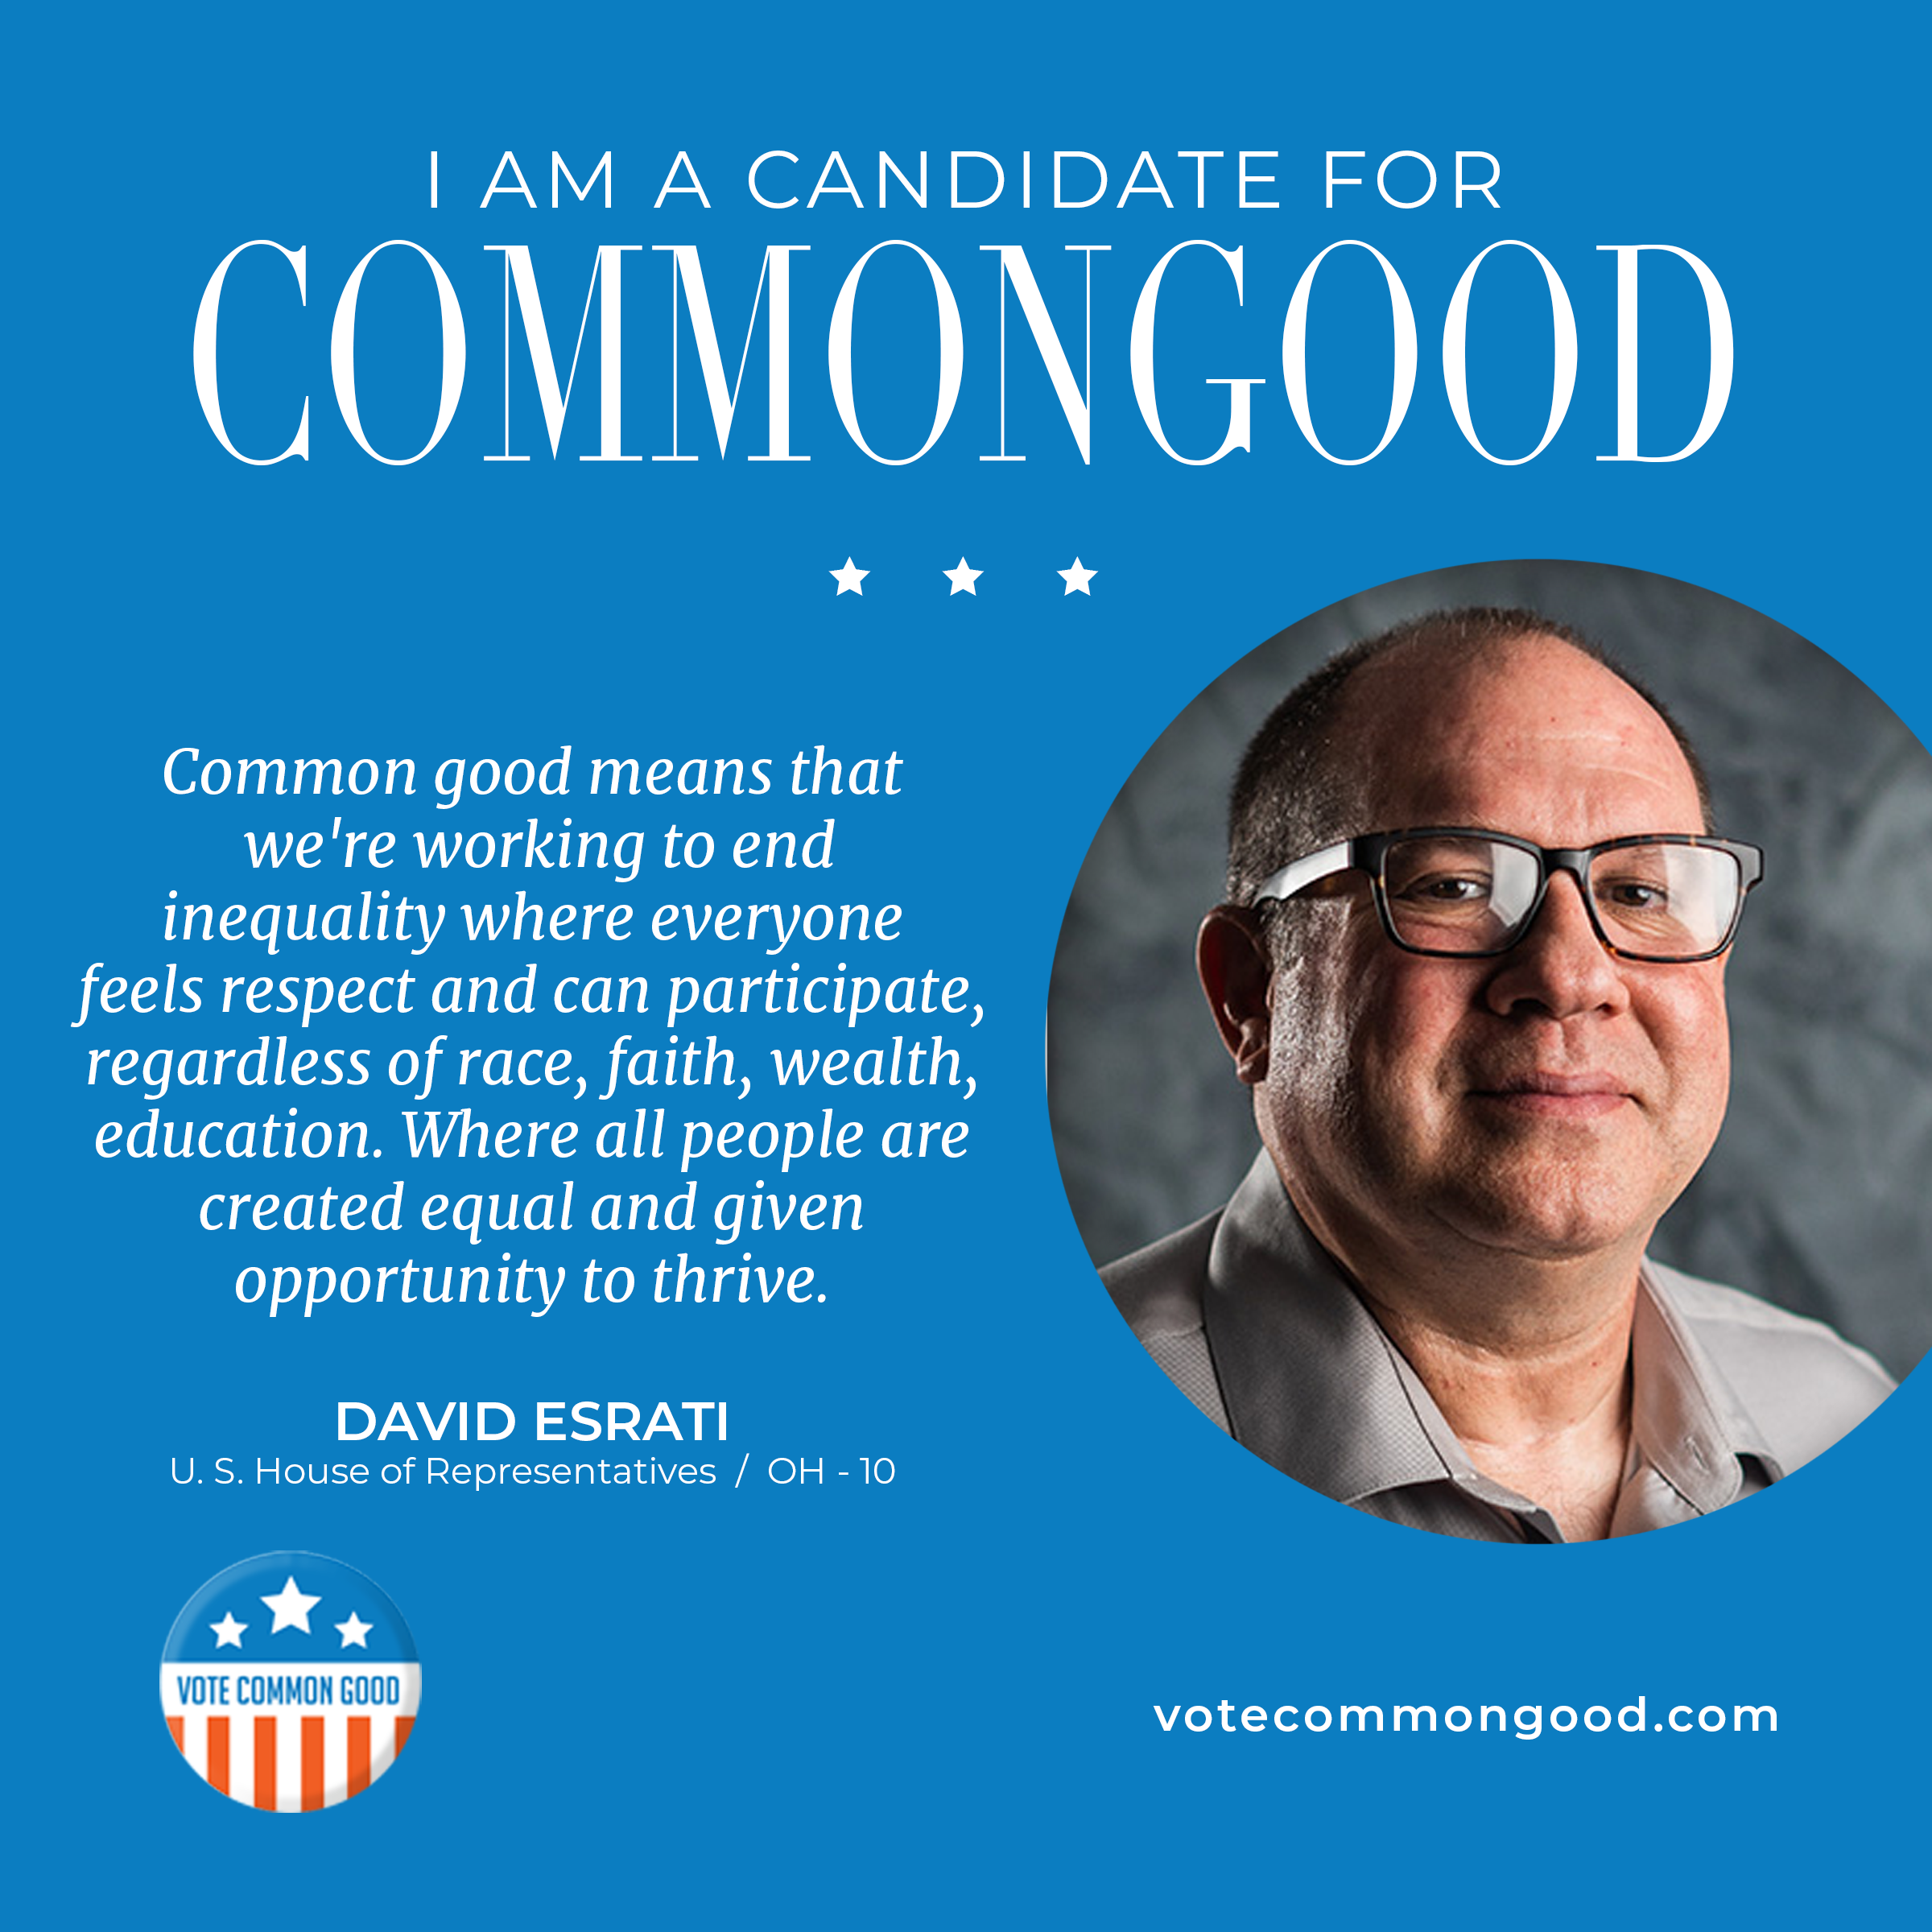 David Esrati candidate in OH-10 endorsed by Candidates for Common Good